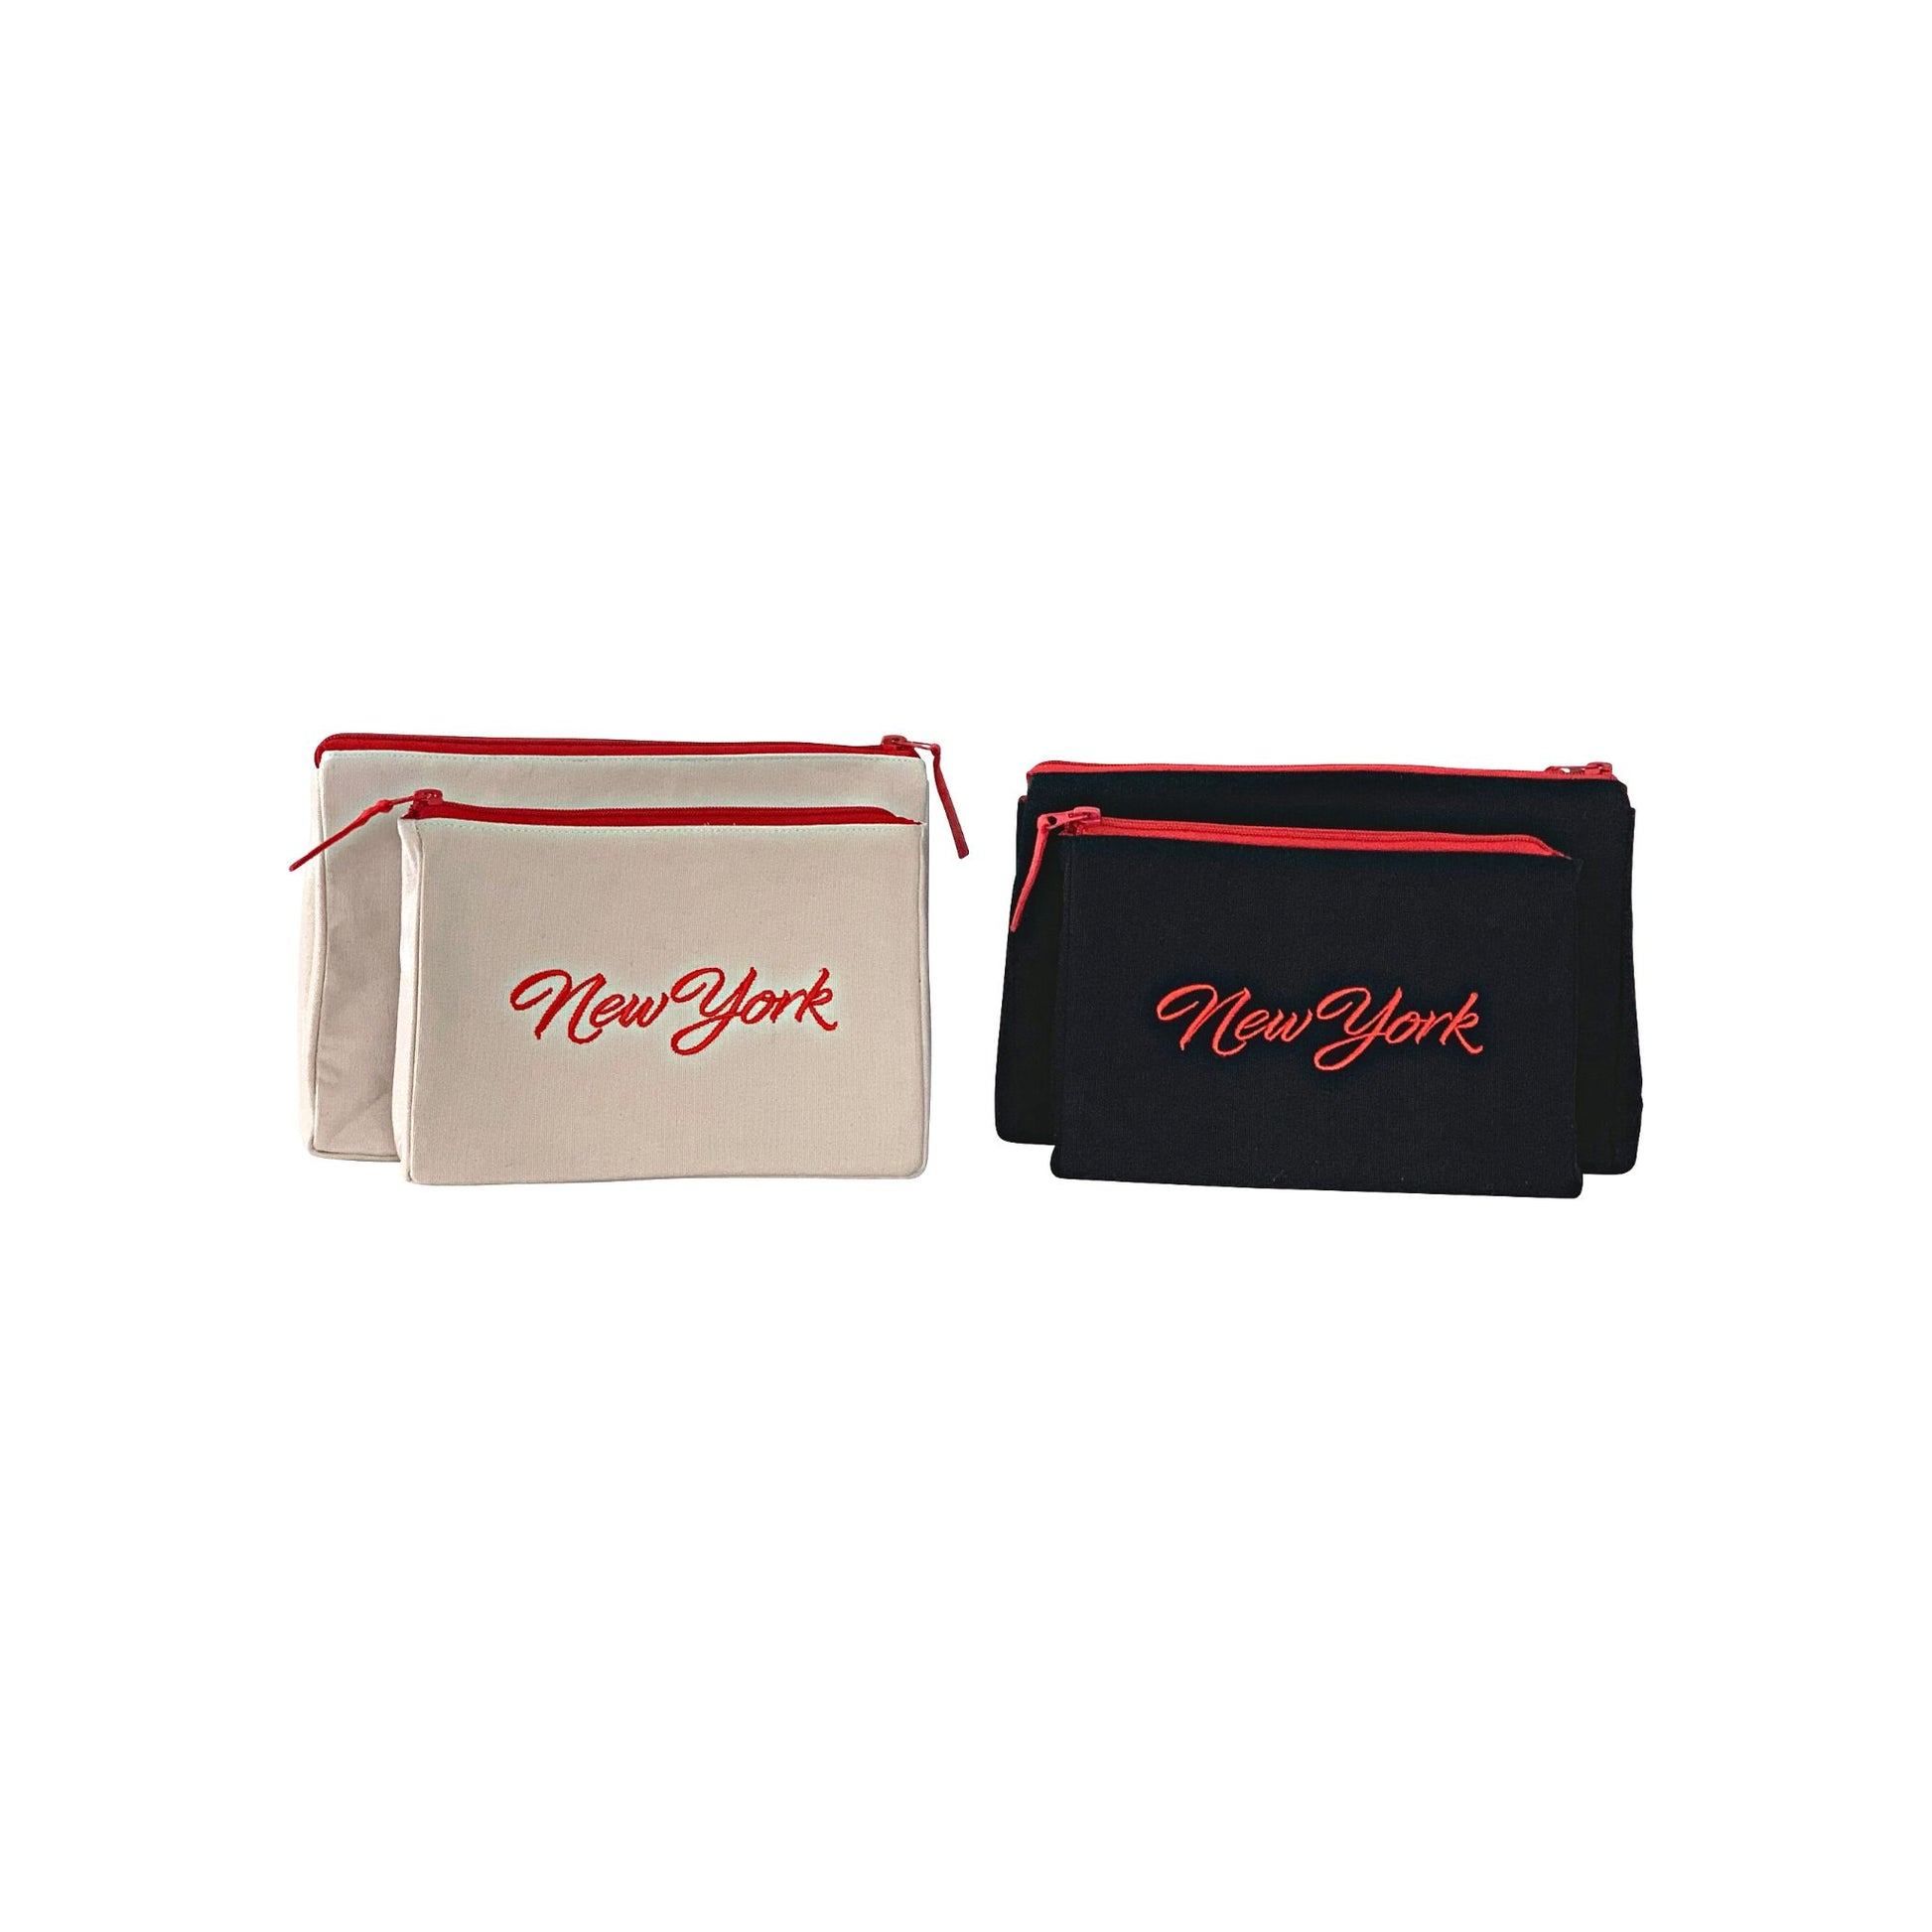 New York City makeupbag sets day and night